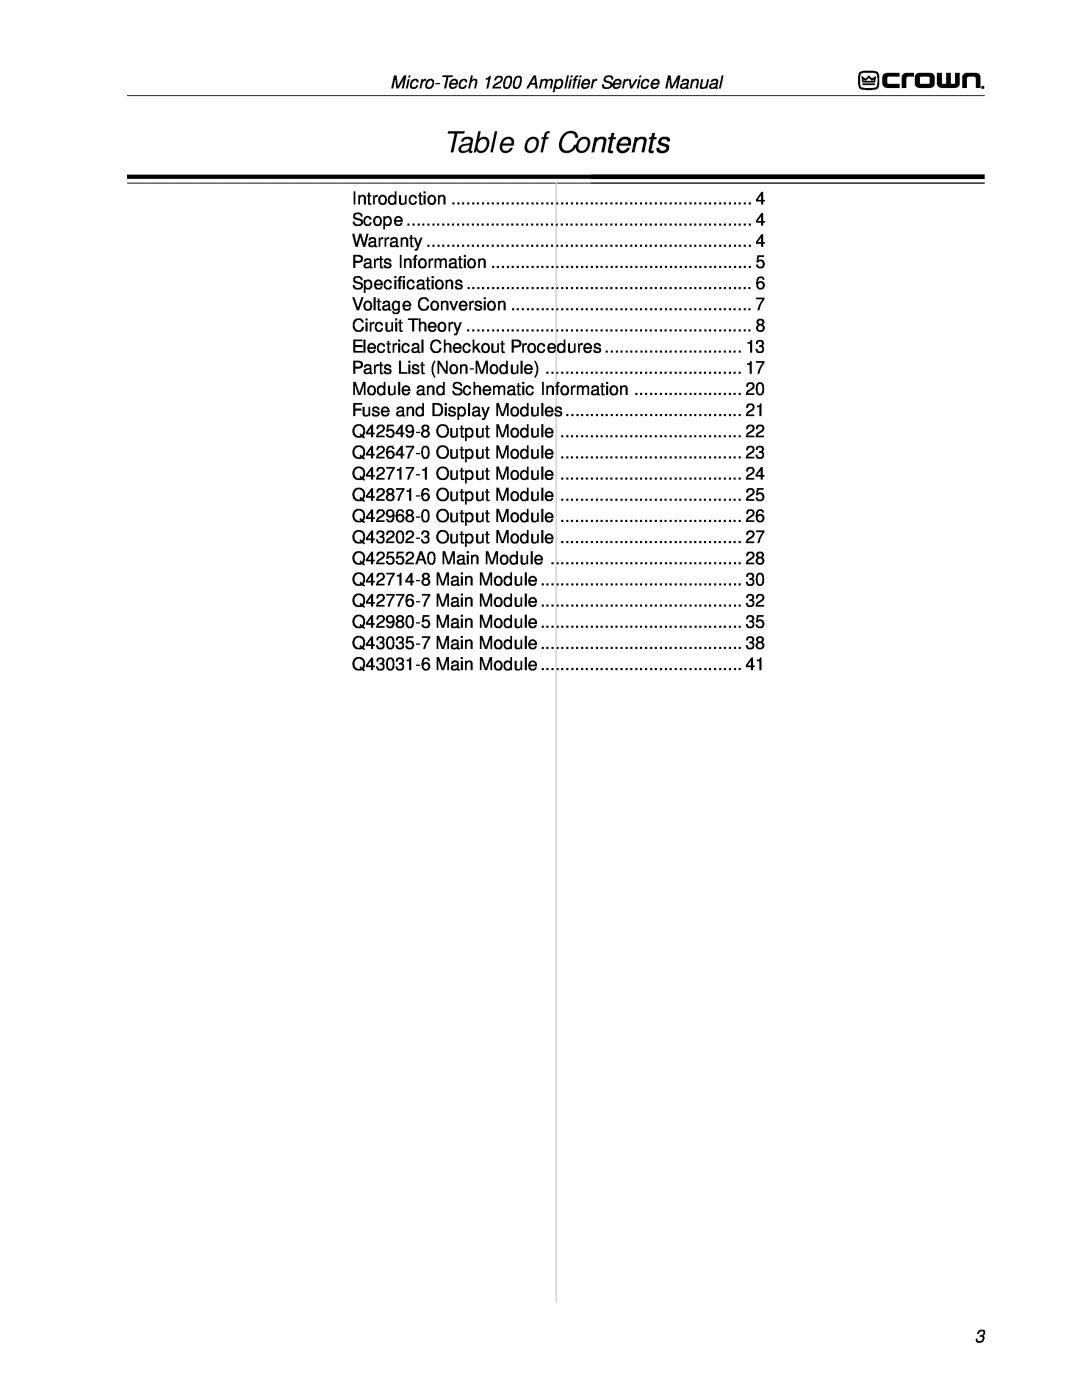 Crown Audio 1200 service manual Table of Contents 